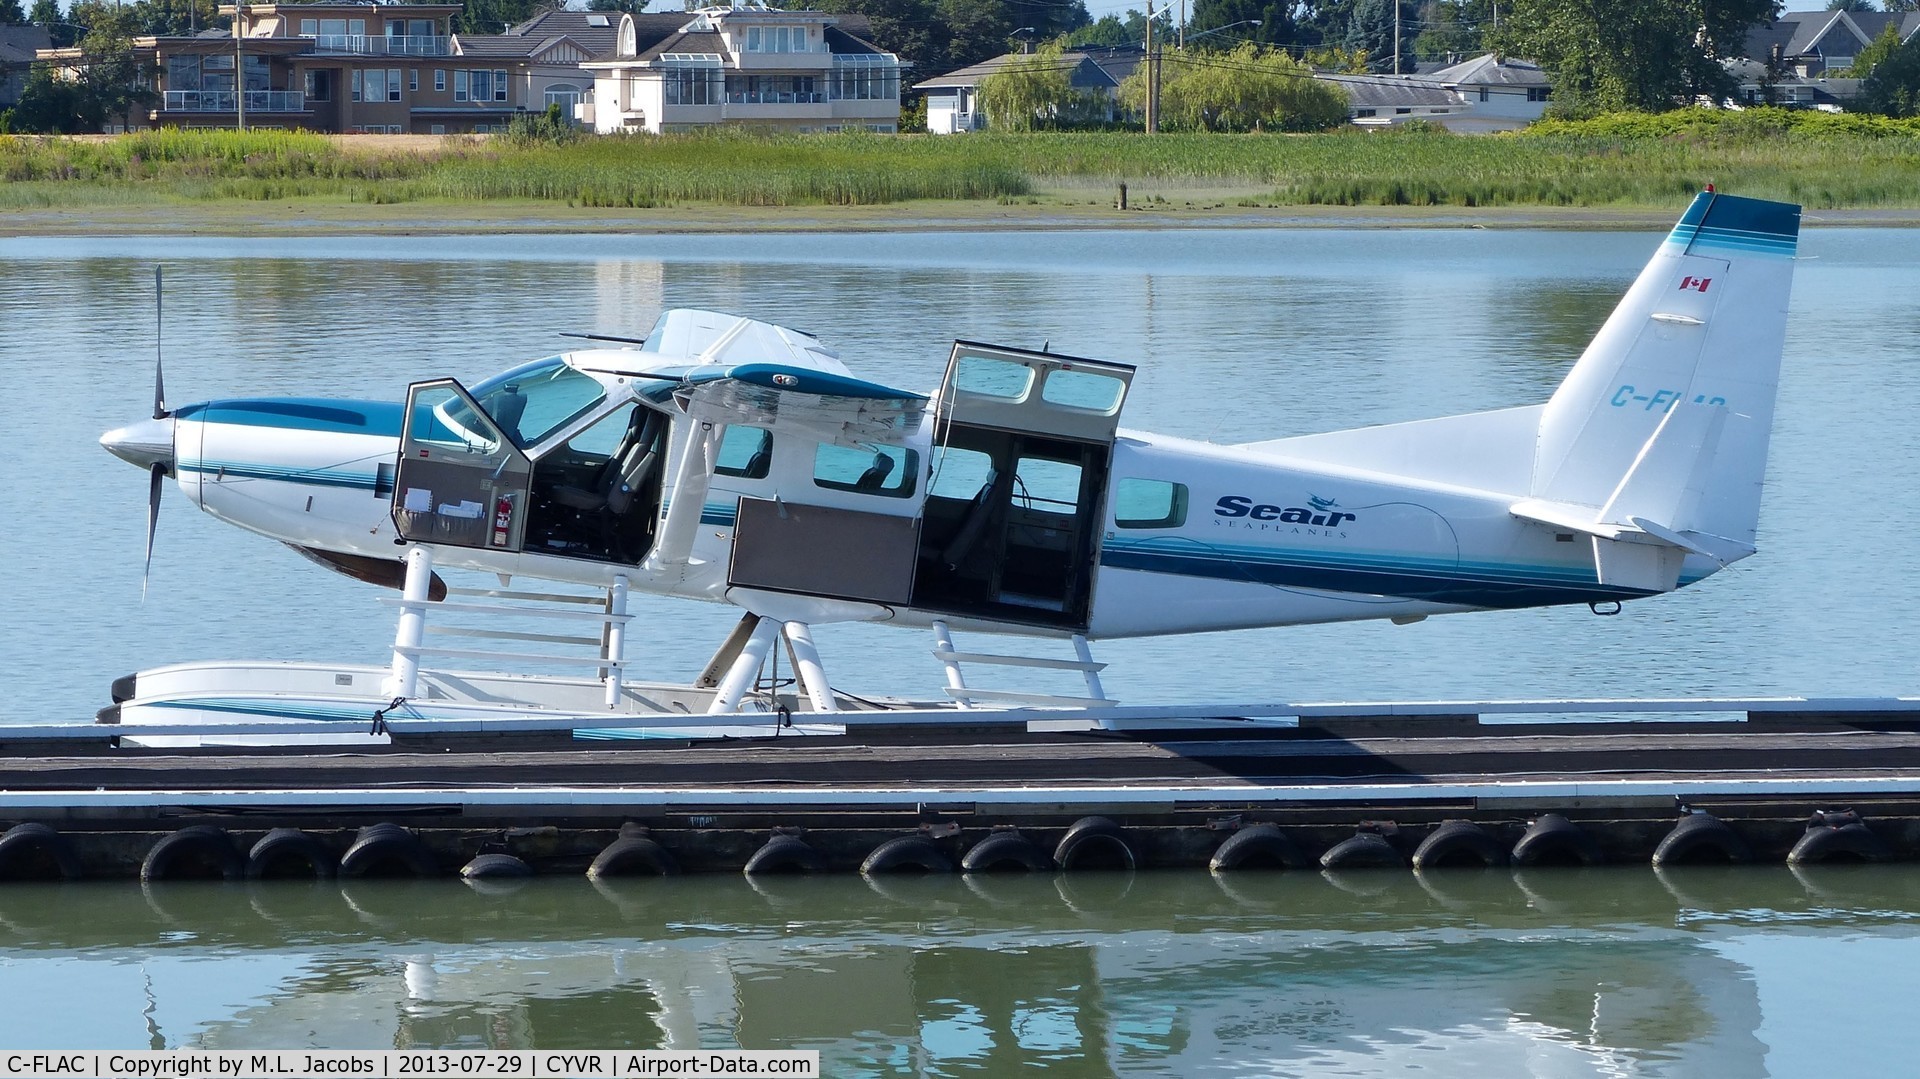 C-FLAC, 2002 Cessna 208 Caravan I C/N 20800357, Seair Seaplanes Cessna at the Fraser River terminal dock and ready for the next flight.